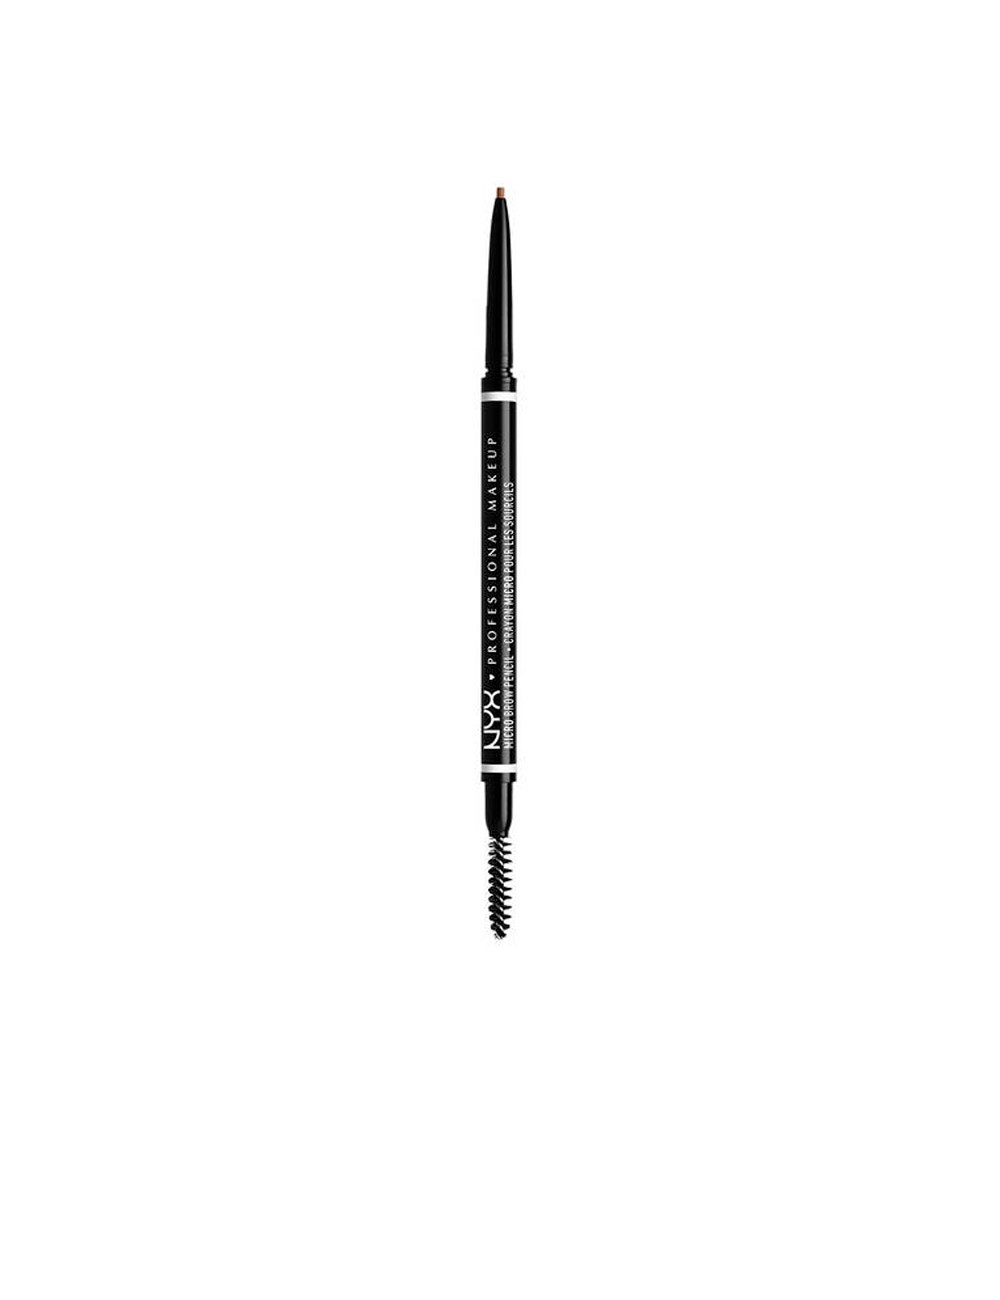 Crayon à sourcils double embout MICRO BROW taupe